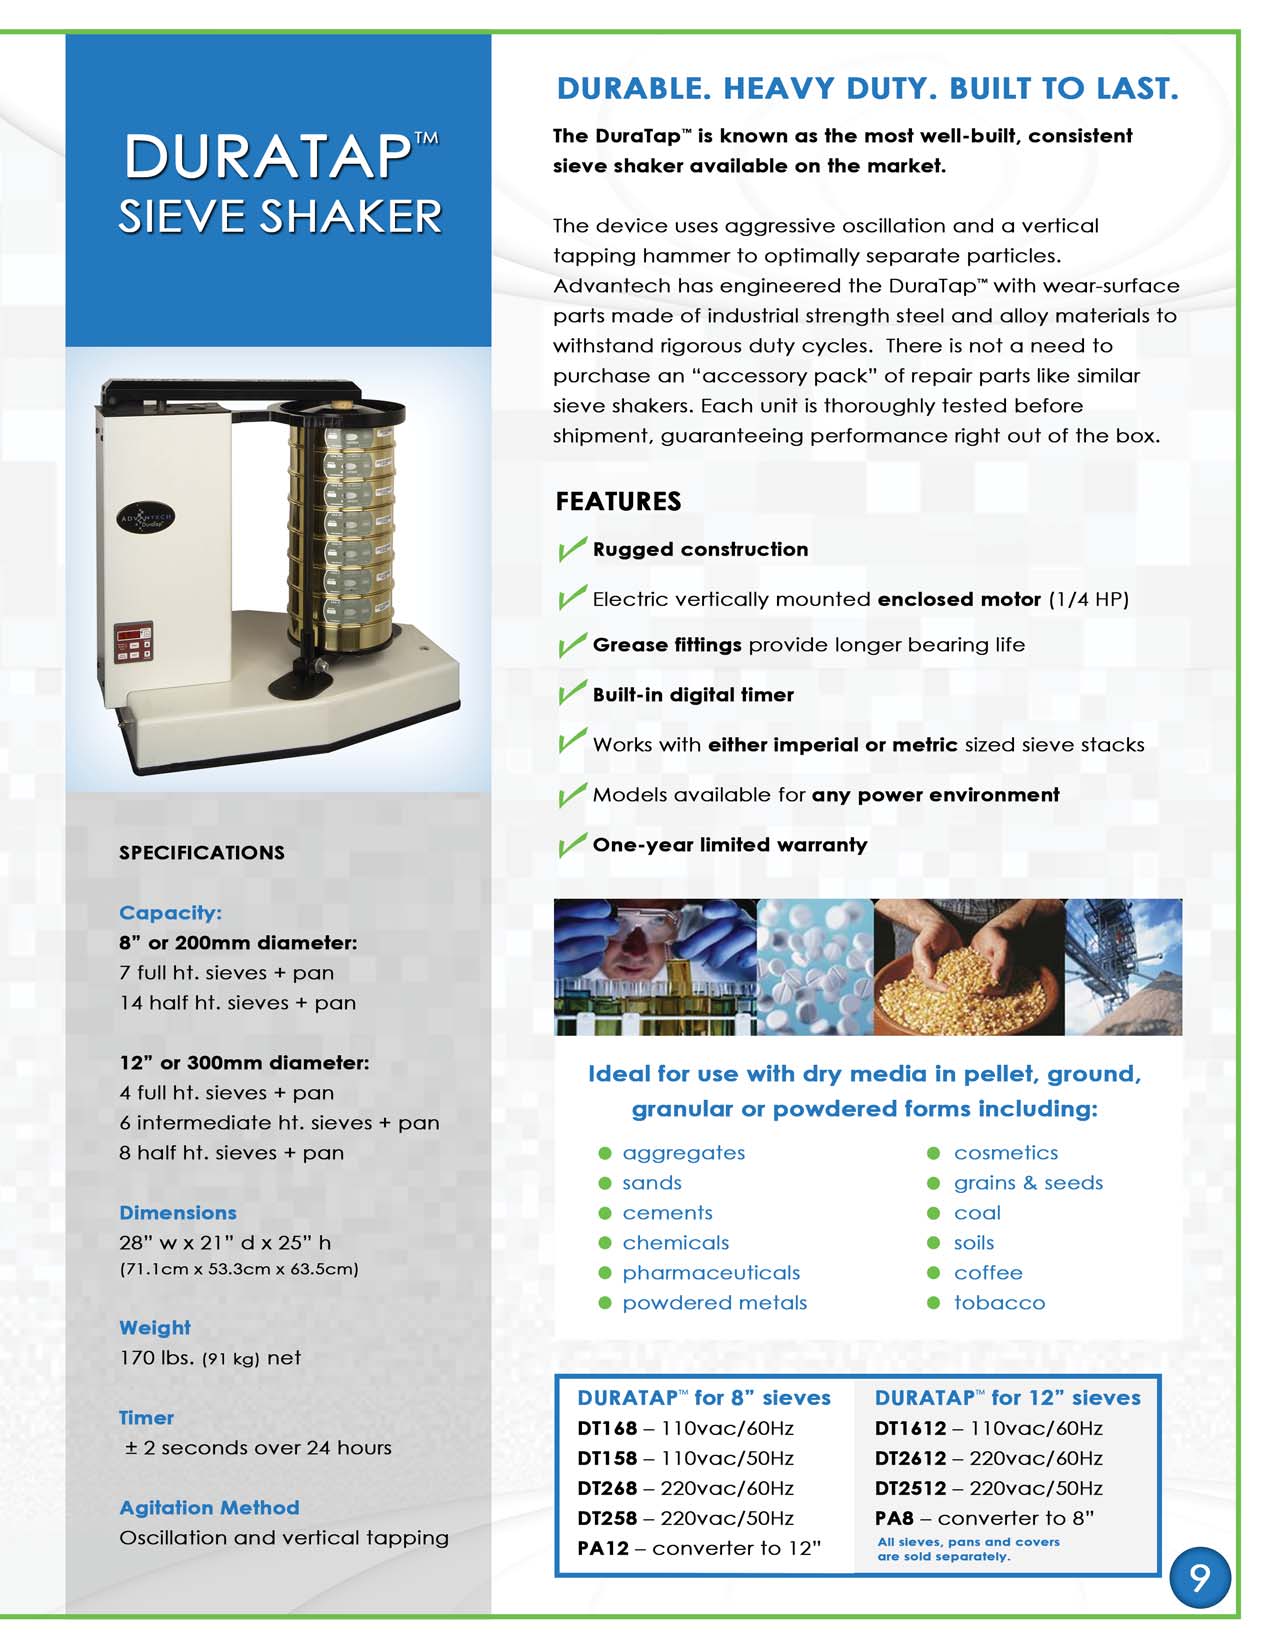 advantech-sieves-and-shakers-catalog-2020-page-11.jpg